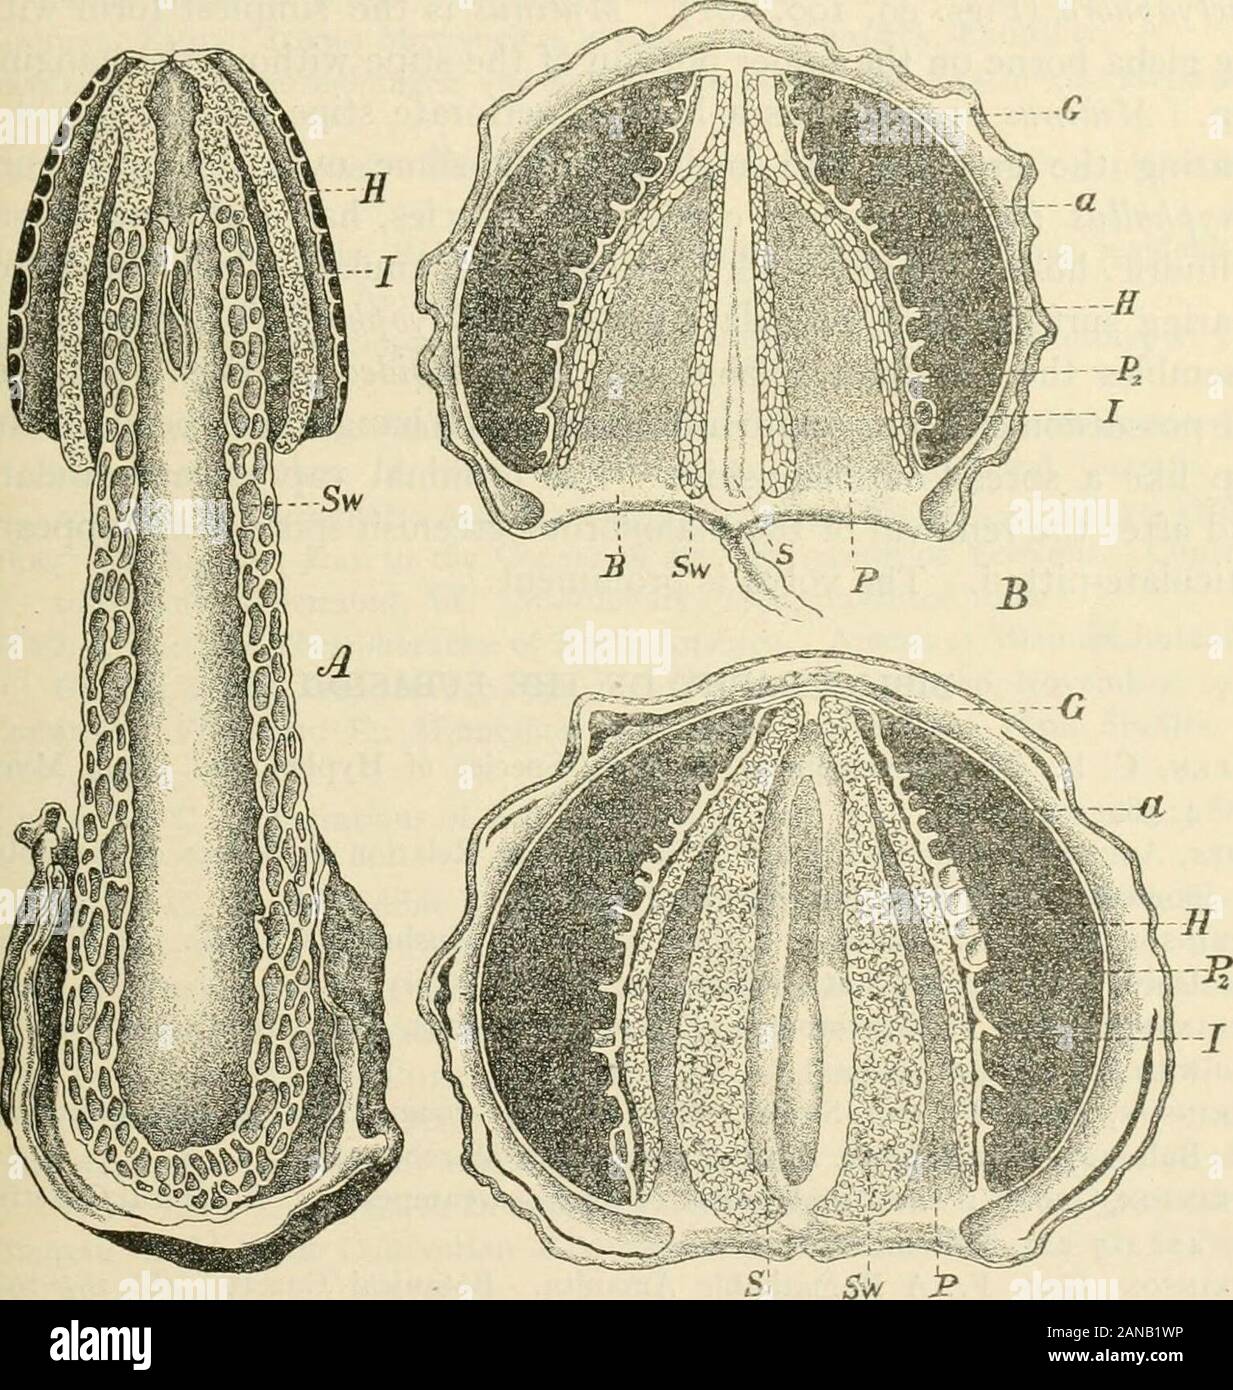 A text-book of mycology and plant pathology . Fig. 100.—Diclyophora phaUoidcii. Fully developed fruit-body with veil 2/3 naturalsize. {After Alf Moller in Die naliirlichen pjlanzenfamilien I. lA**, p. 294.) that three common forms were examined, viz., Ithyphallus impudicus,Diclyophora duplicata and the Phallus Ravenellii. Two families are distinguished: Clathrace^ and PHALLACEiEwhich may be distinguished as follows: MUSHROOMS AND TOADSTOOLS 251 Receptacle latticed or irregularly hrauched, sessile or stalked;gleba inclosed within the receptacle. Family i. Clathracf:^. Receptacle tubular or cyli Stock Photo